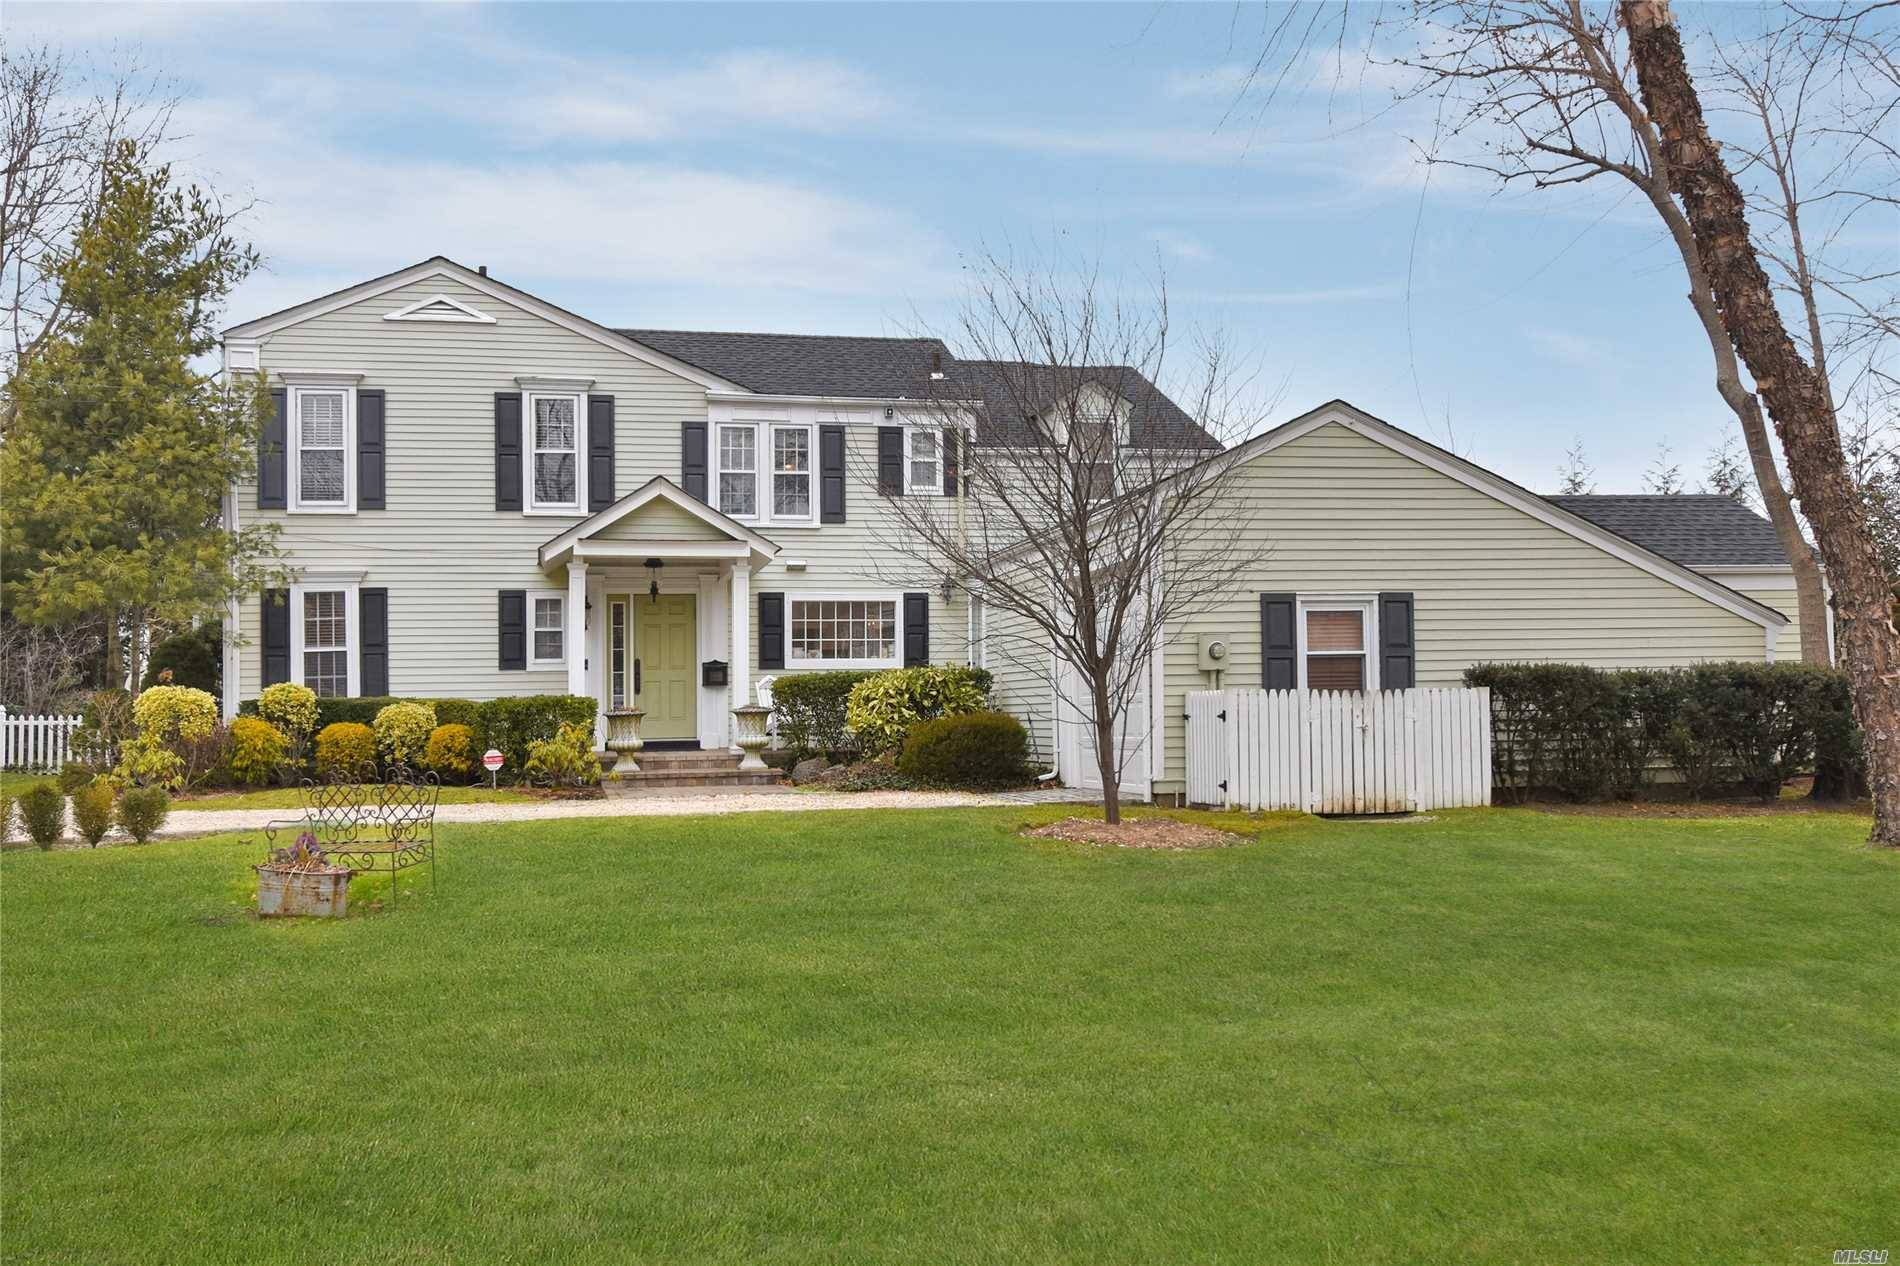 Tucked Away In The Estate Area Of Lawrence, This Traditional 6 Br, 3.